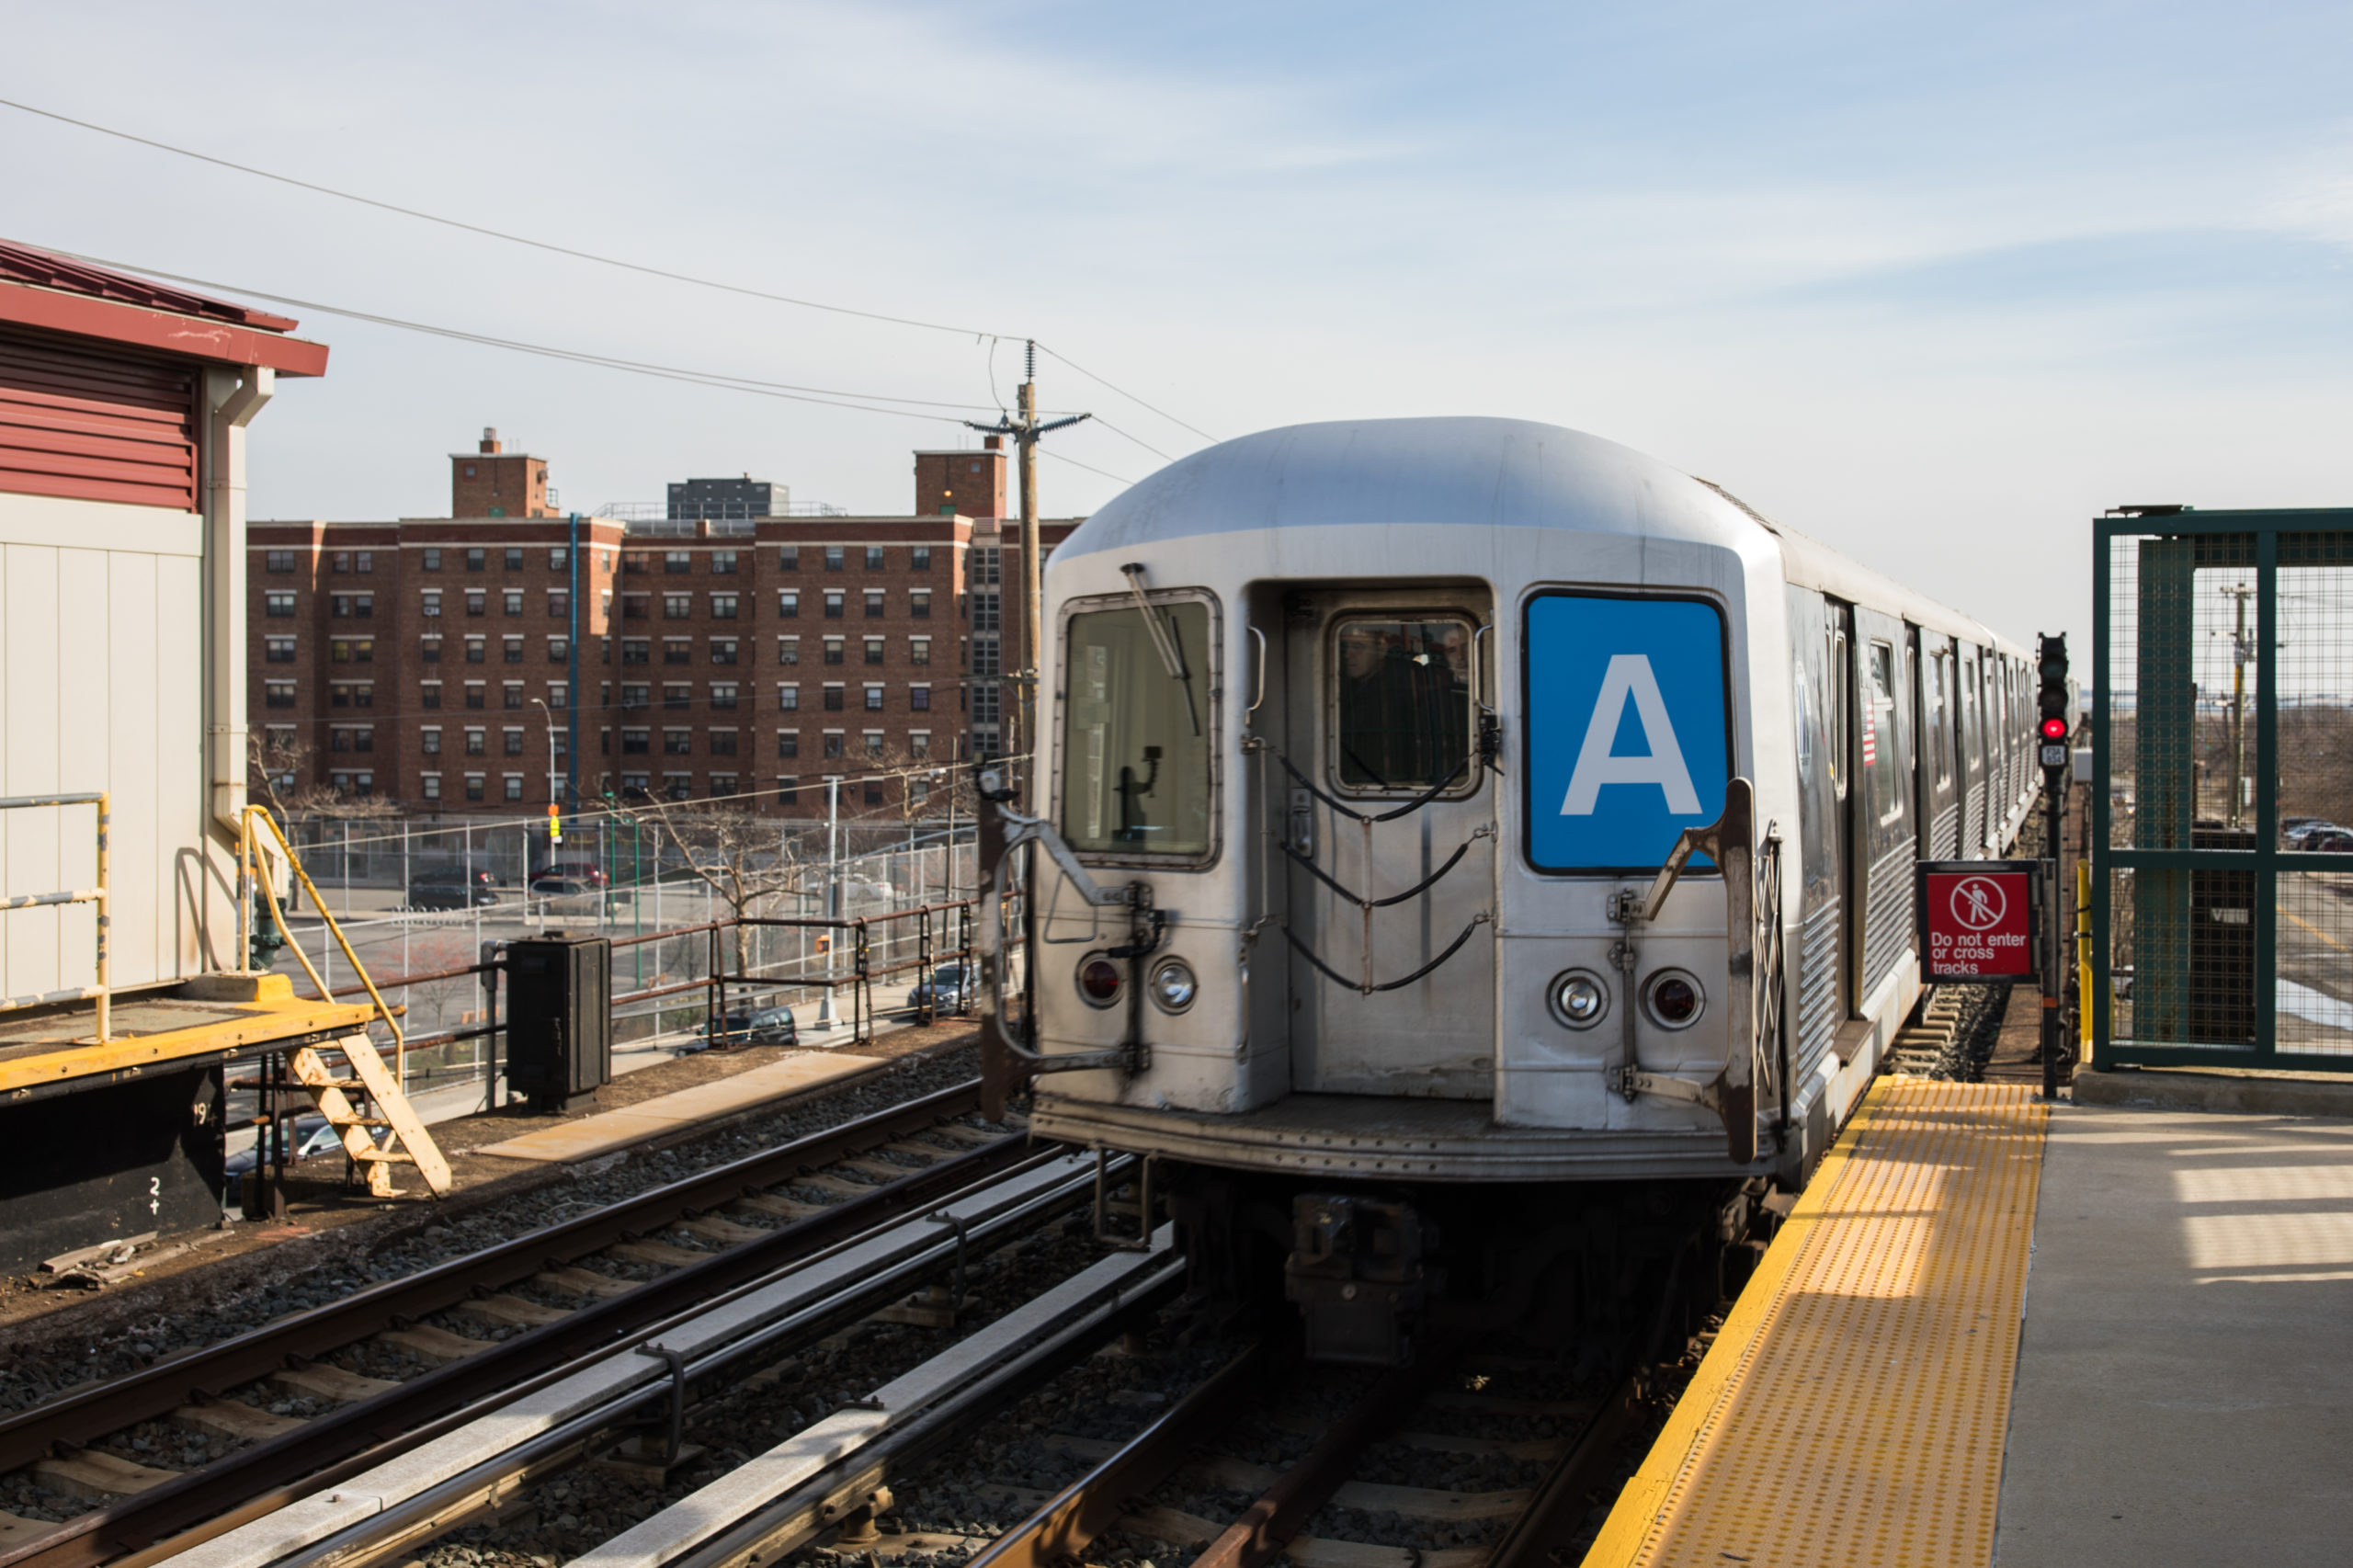 An A train of R-42 subway cars departs a station in Queens on its final ride before going into retirement. Photo: Paul Frangipane/Brooklyn Eagle